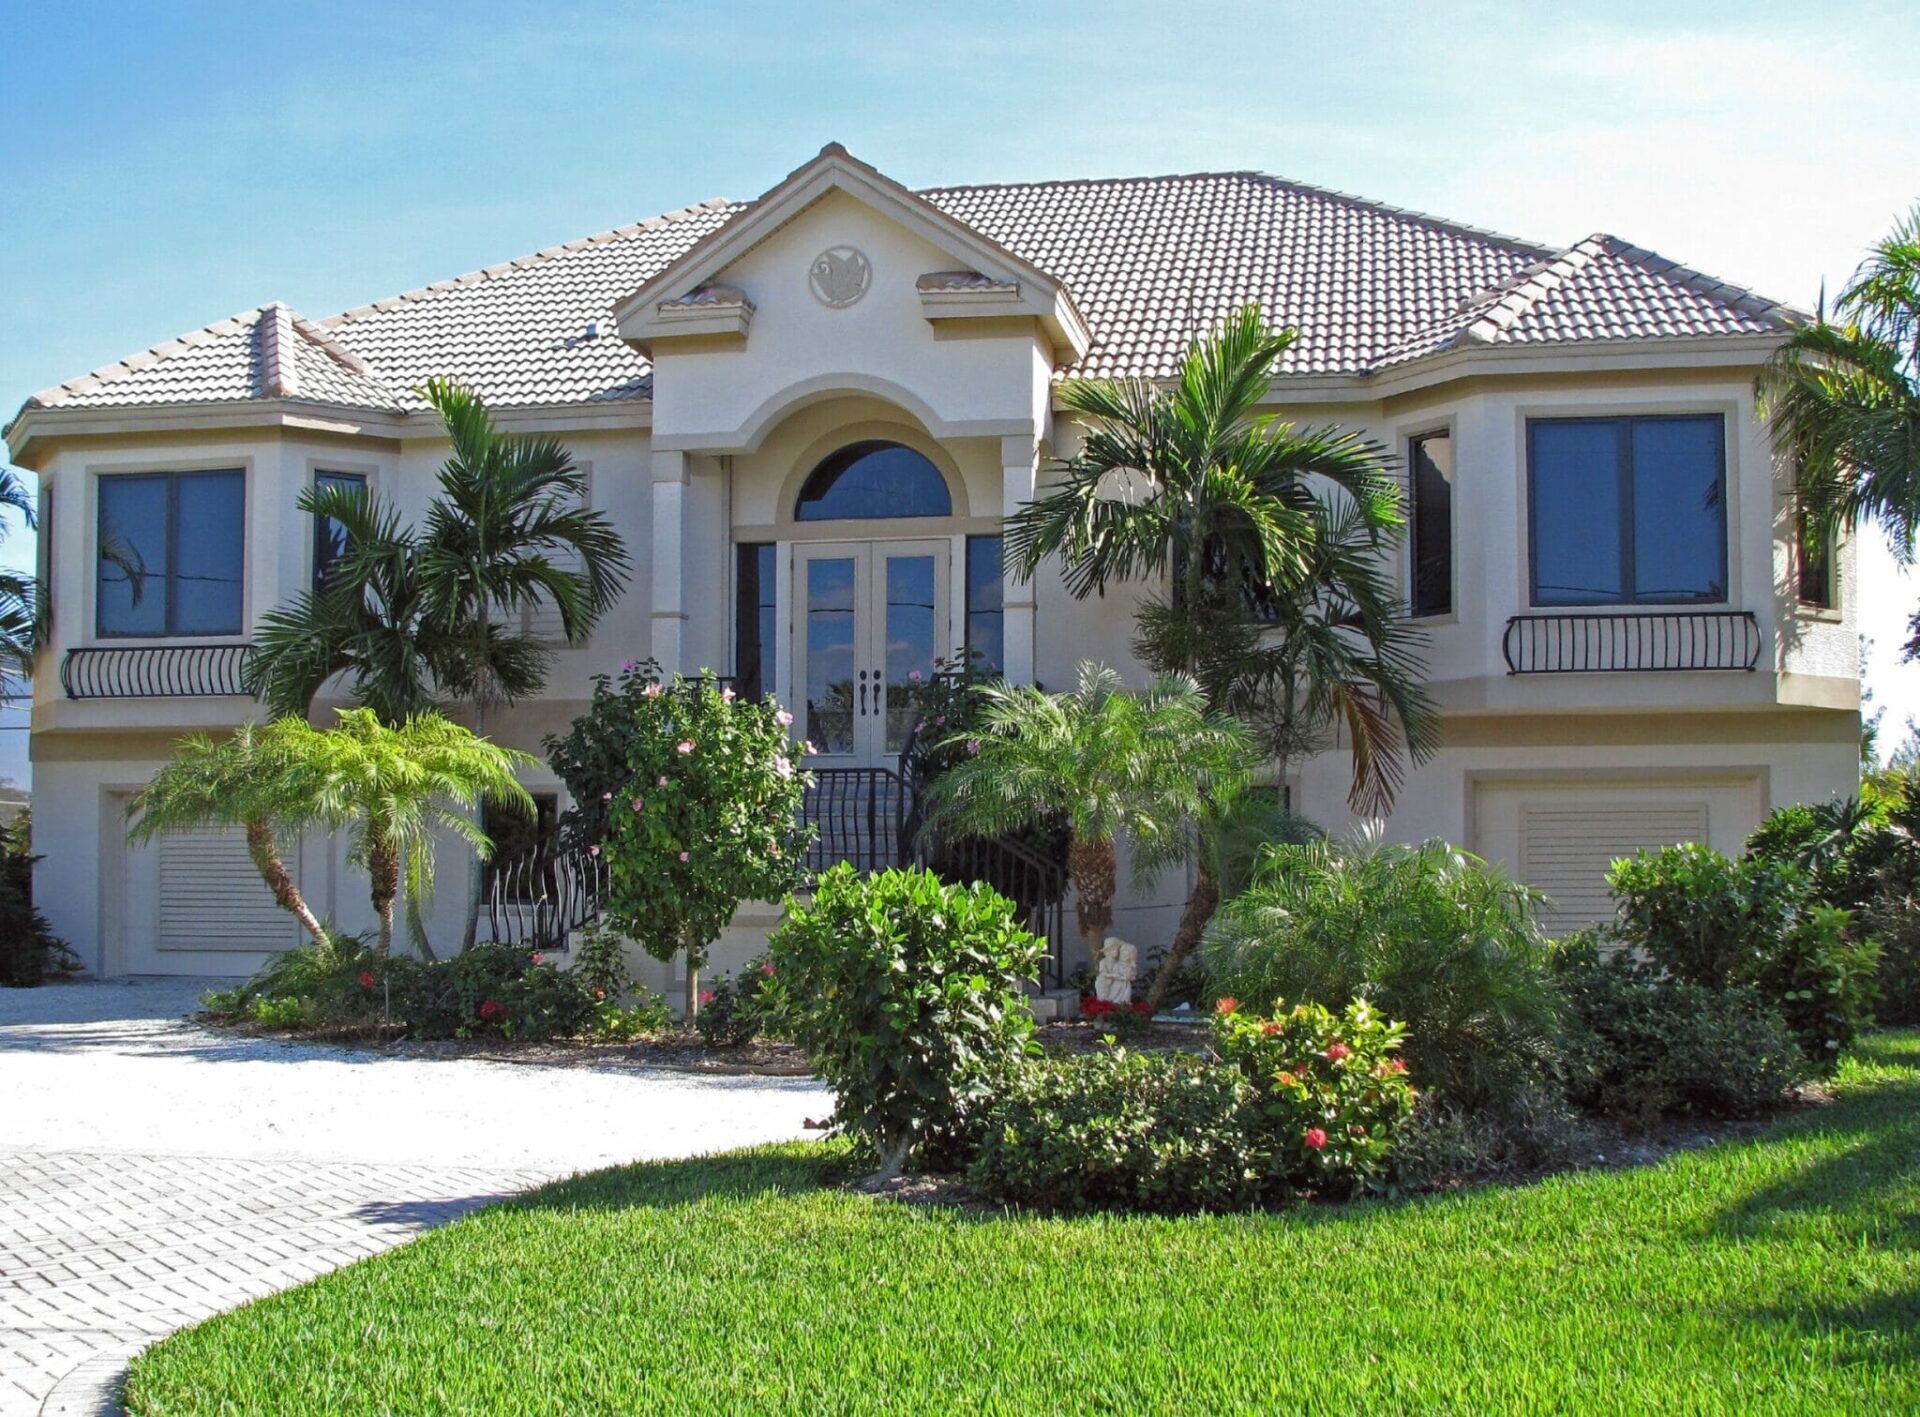 A home in Florida painted white with large green yard and palm trees.